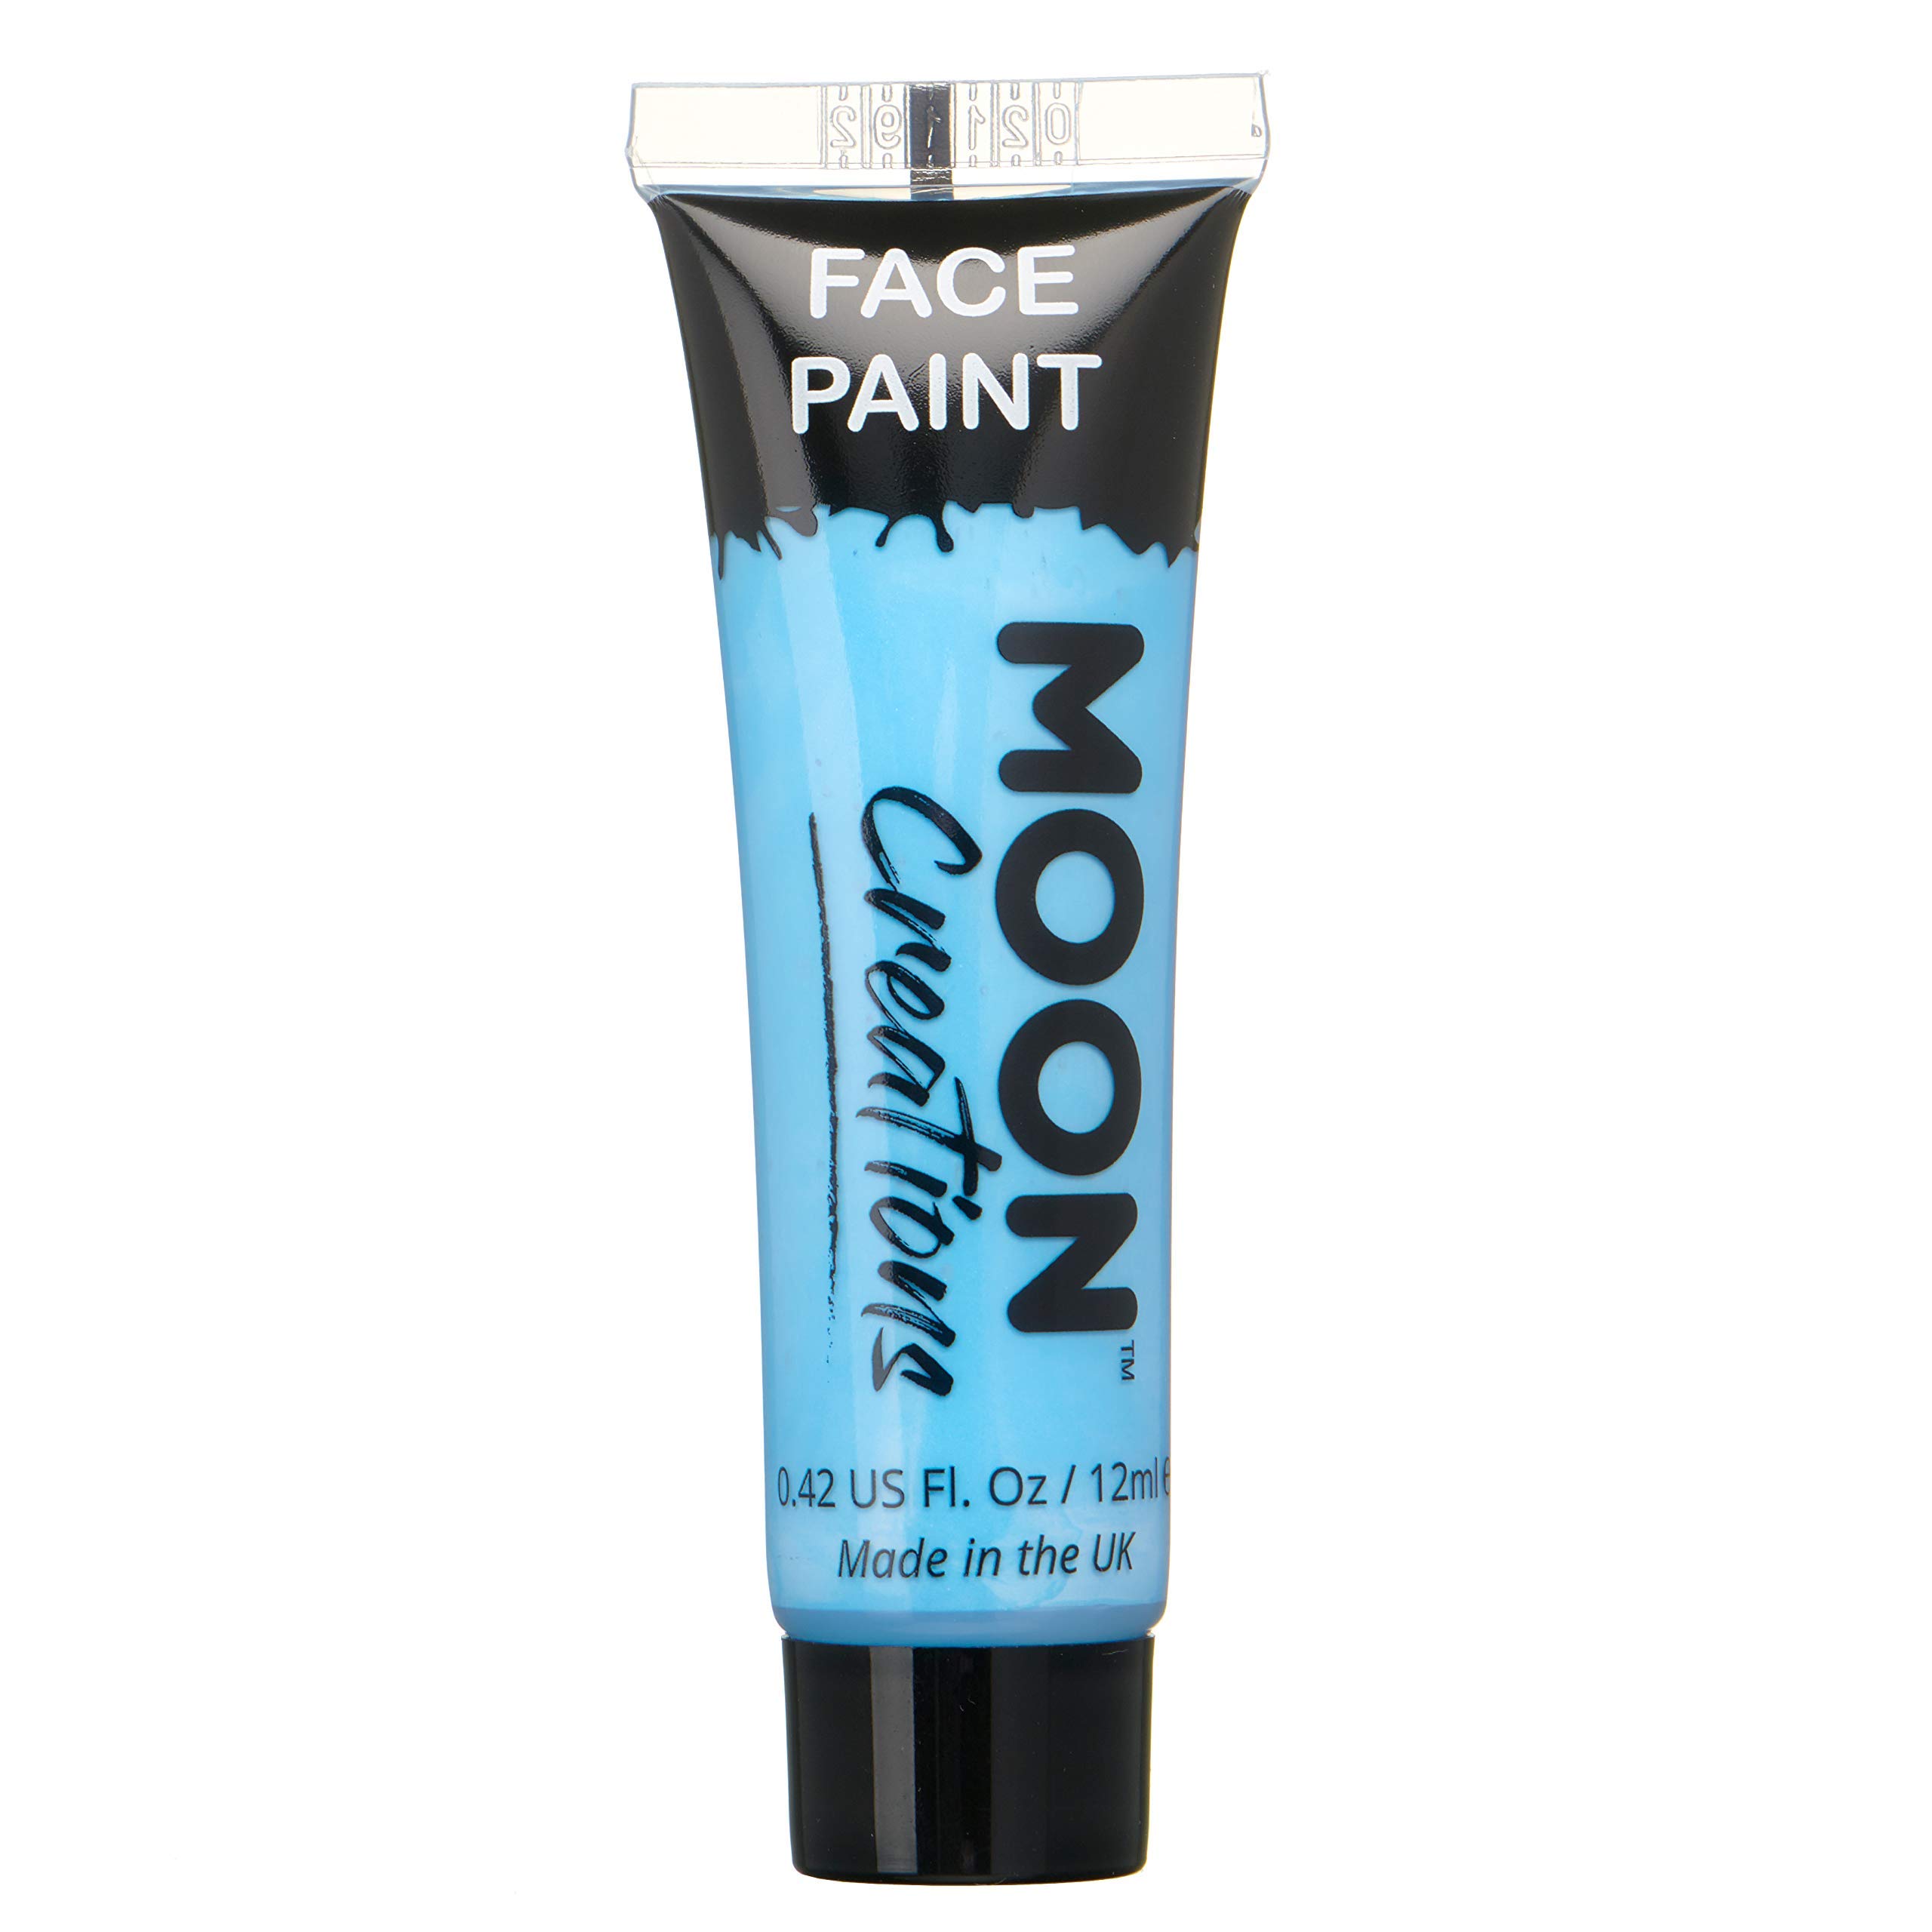 Face & Body Paint by Moon Creations - 0.40fl oz - Light Blue